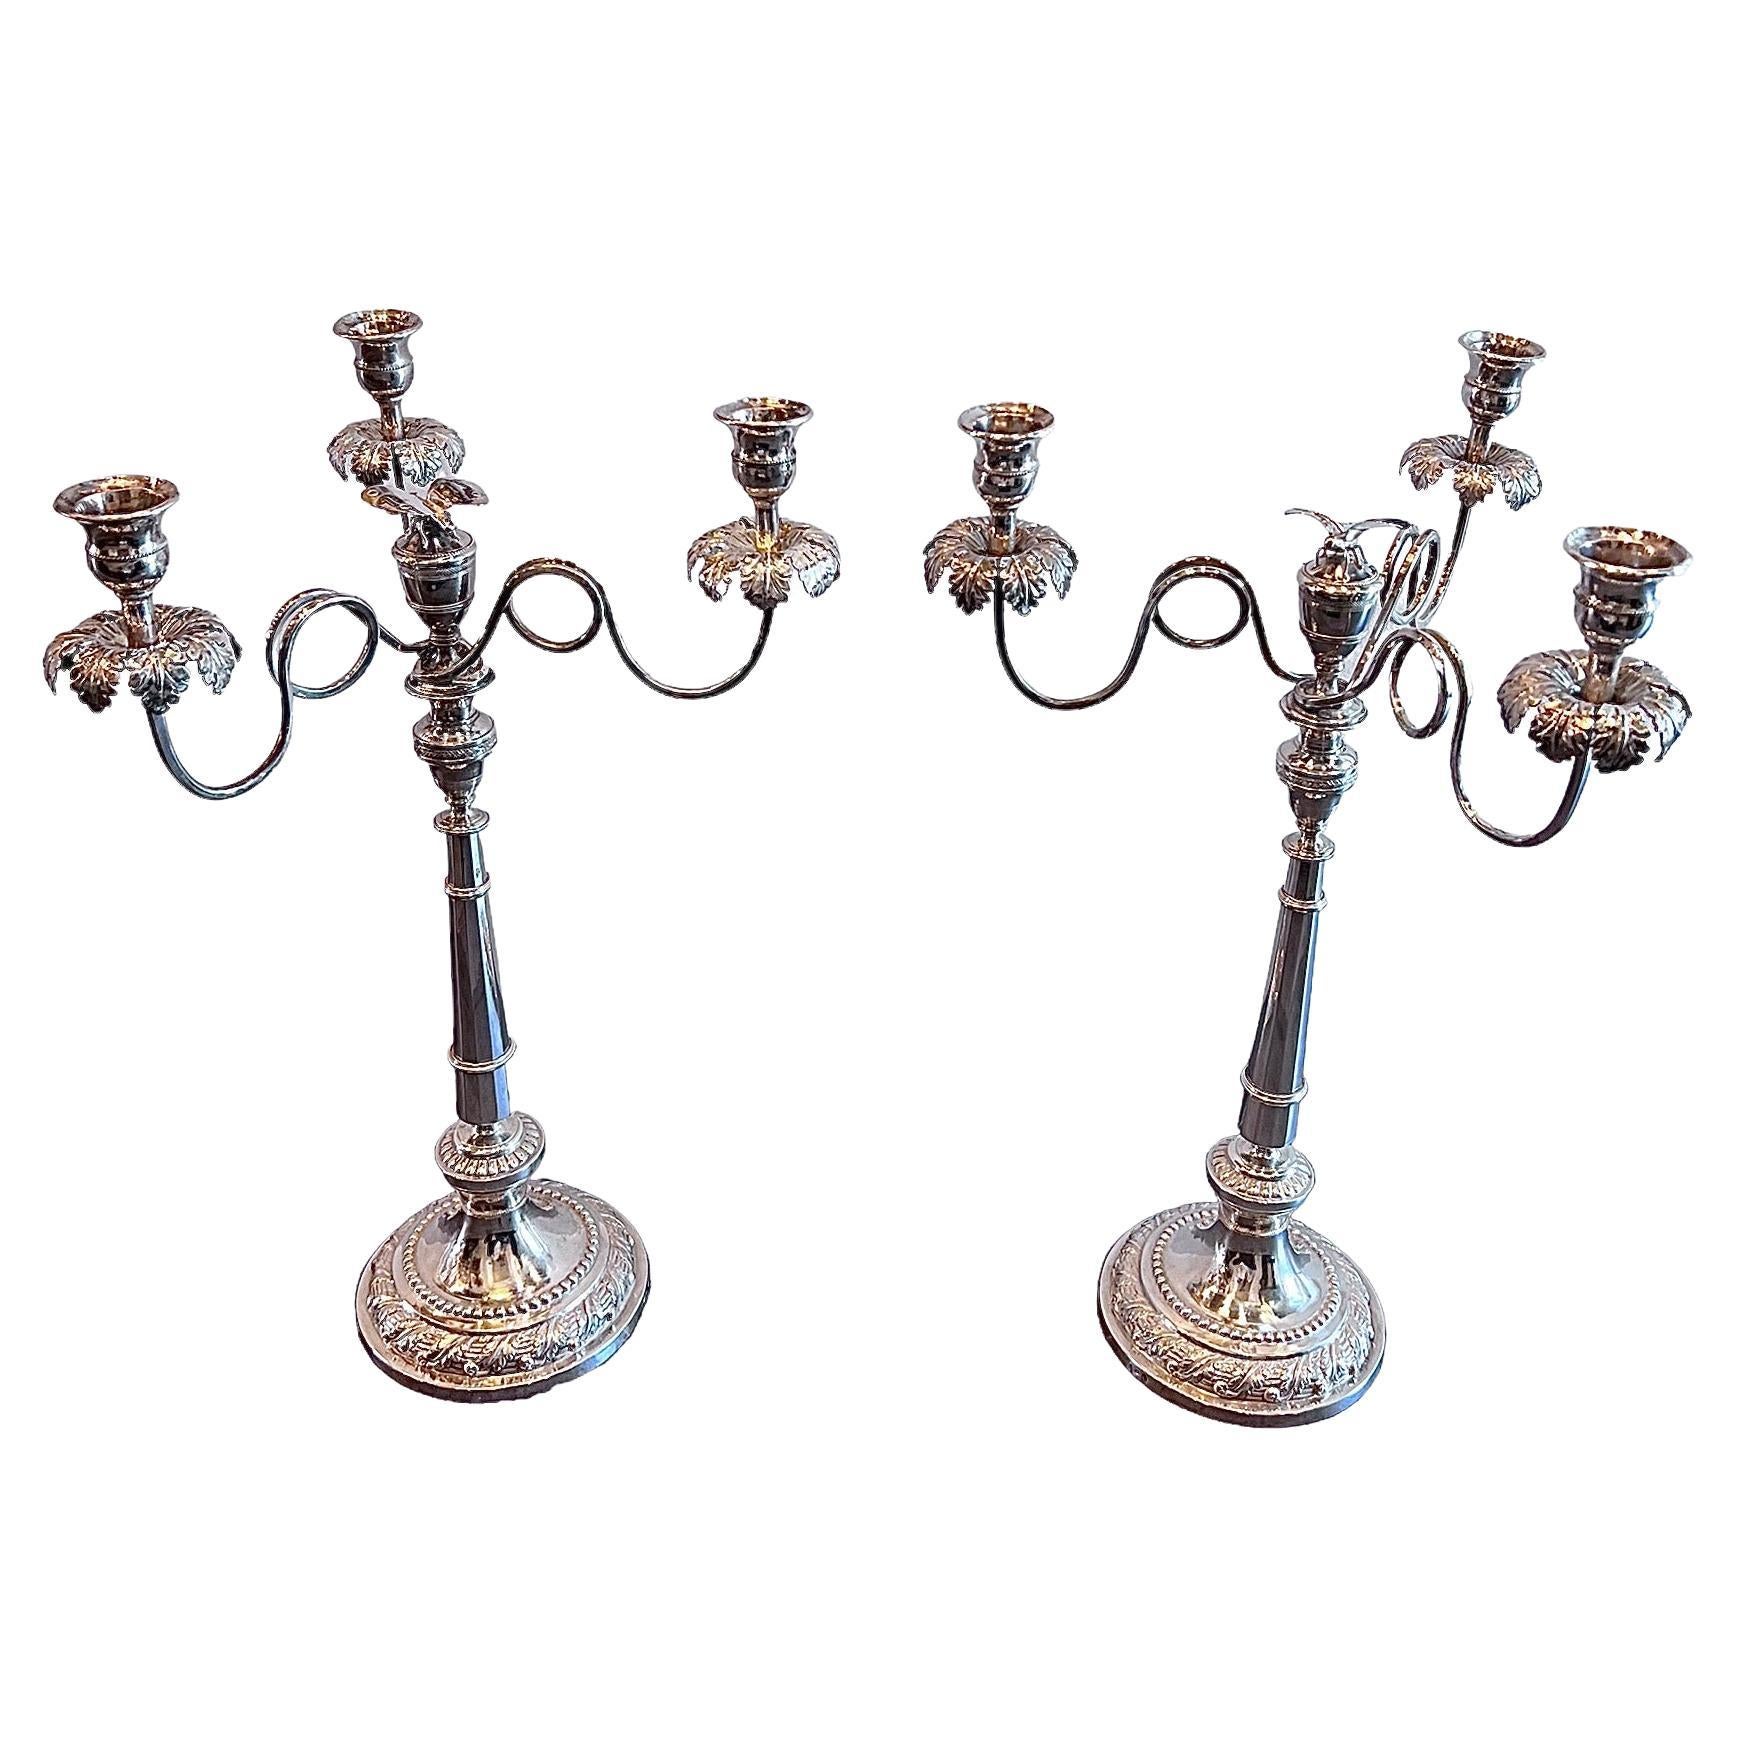 Pair of 1820s Italian Touring Sterling Silver Candelabras For Sale